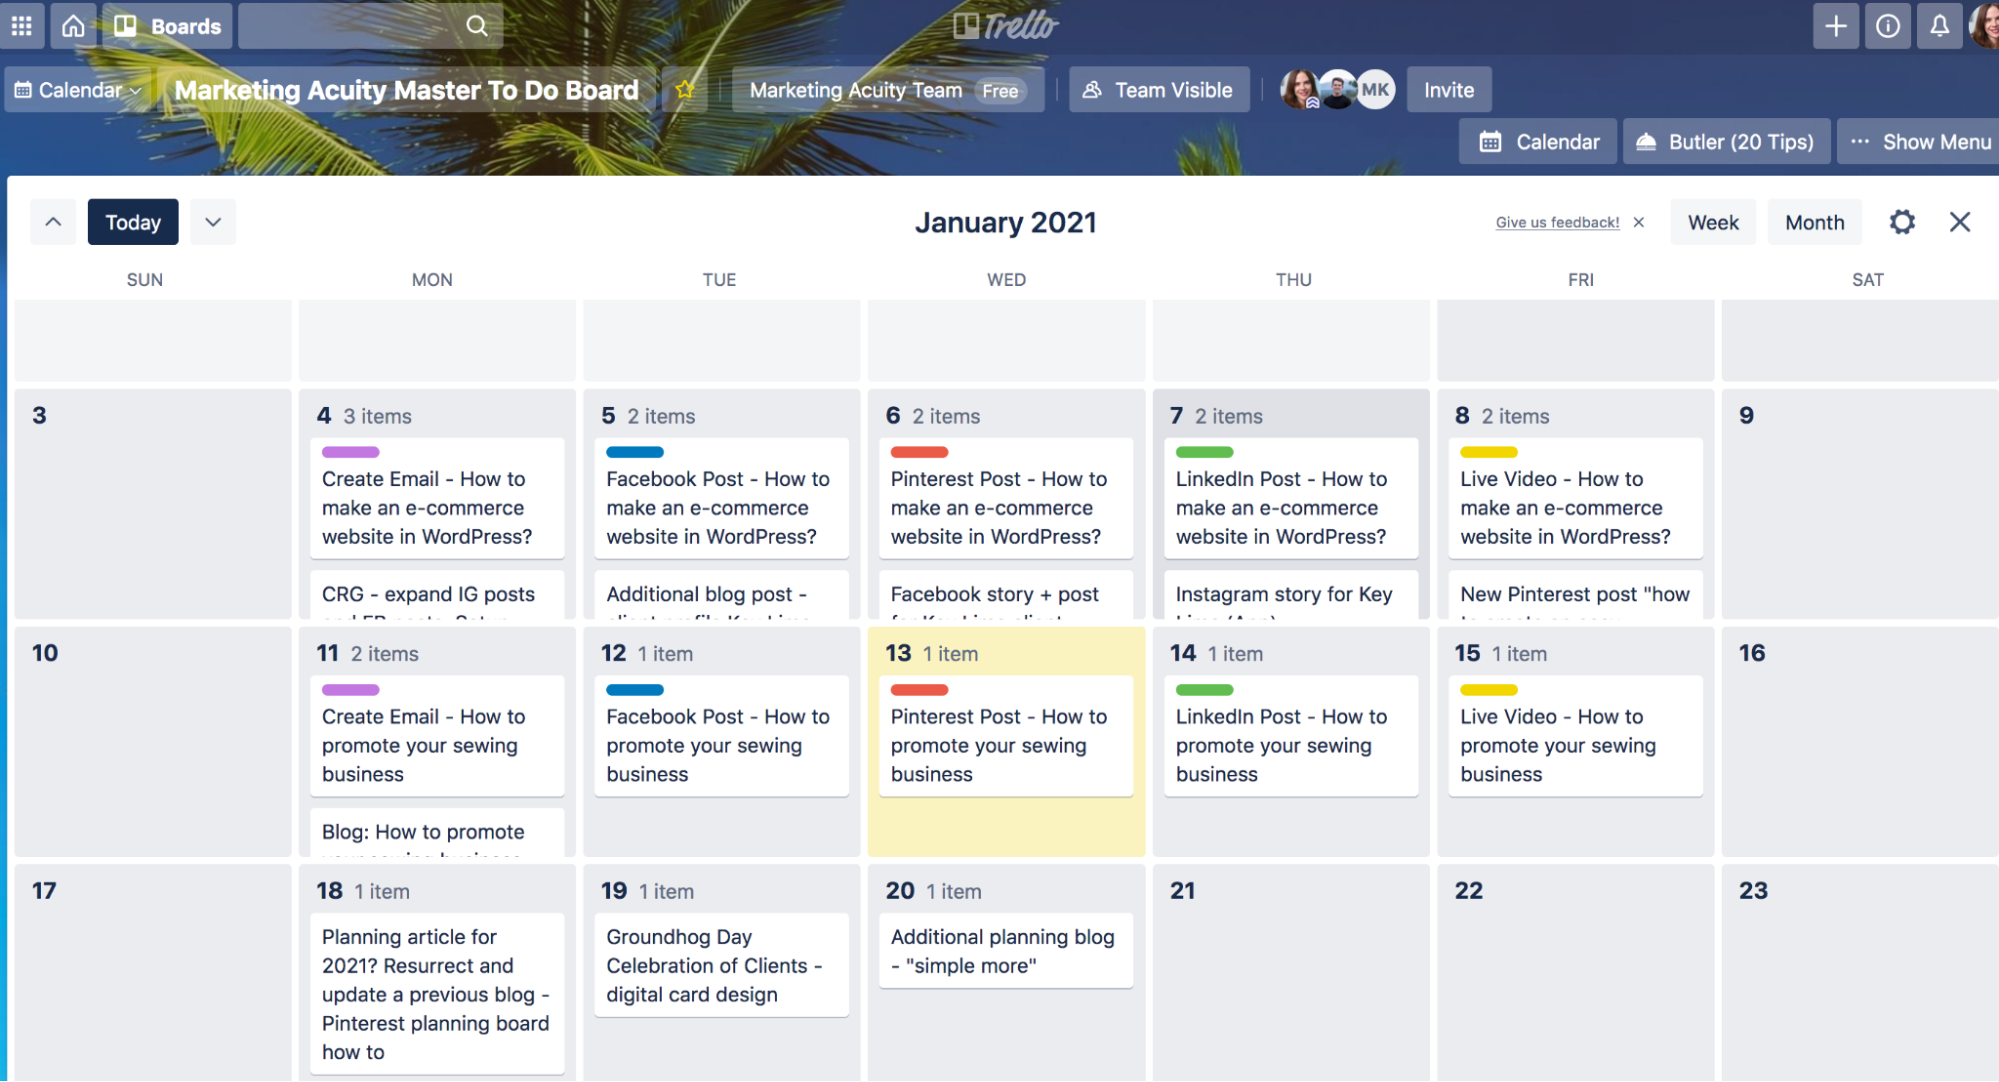 Trello’s monthly calendar view shows upcoming social media posts, post topic, and platform.